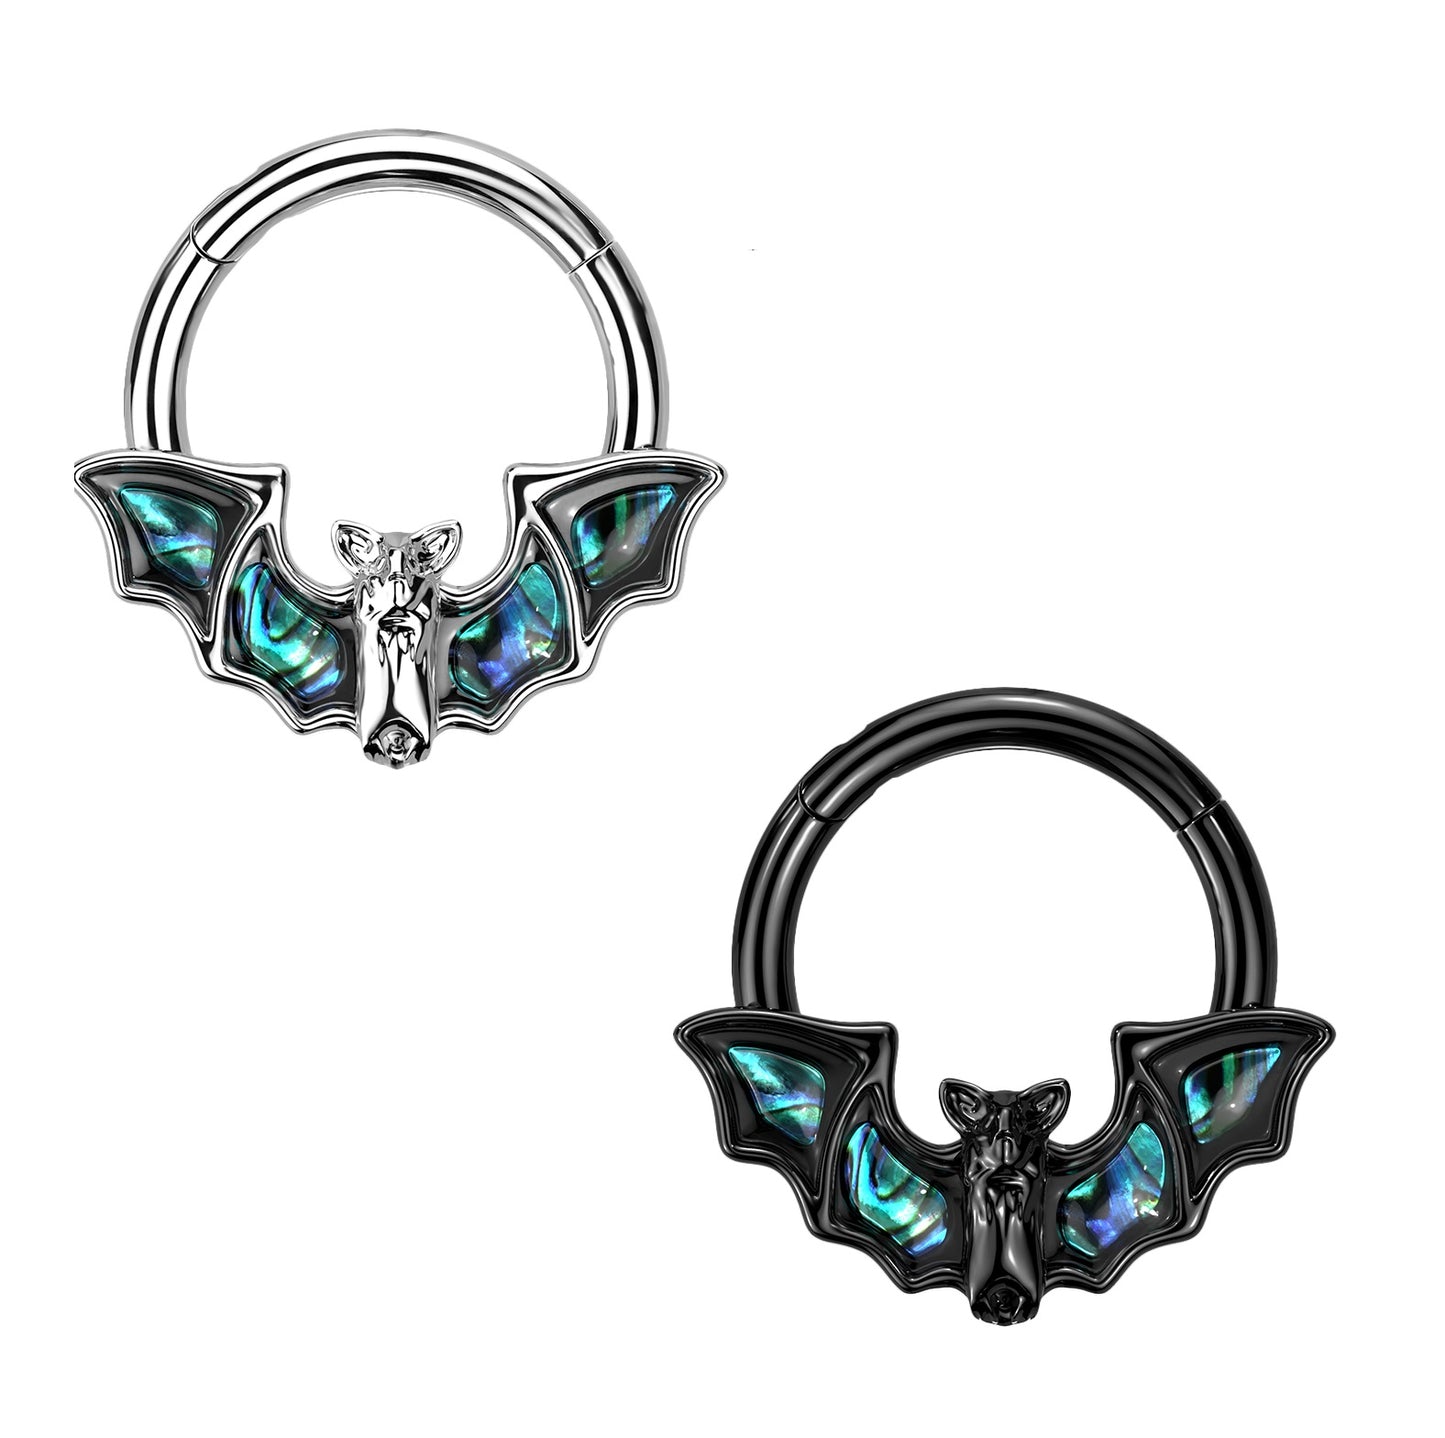 Hinged segment ring with abalone shell bat design. Shown in Black and Surgical Steel. This segment ring is great for septum, daith, or other cartilage piercings.  16 gauge X 8mm. Segment ring is surgical steel, bat adornment is plated brass.